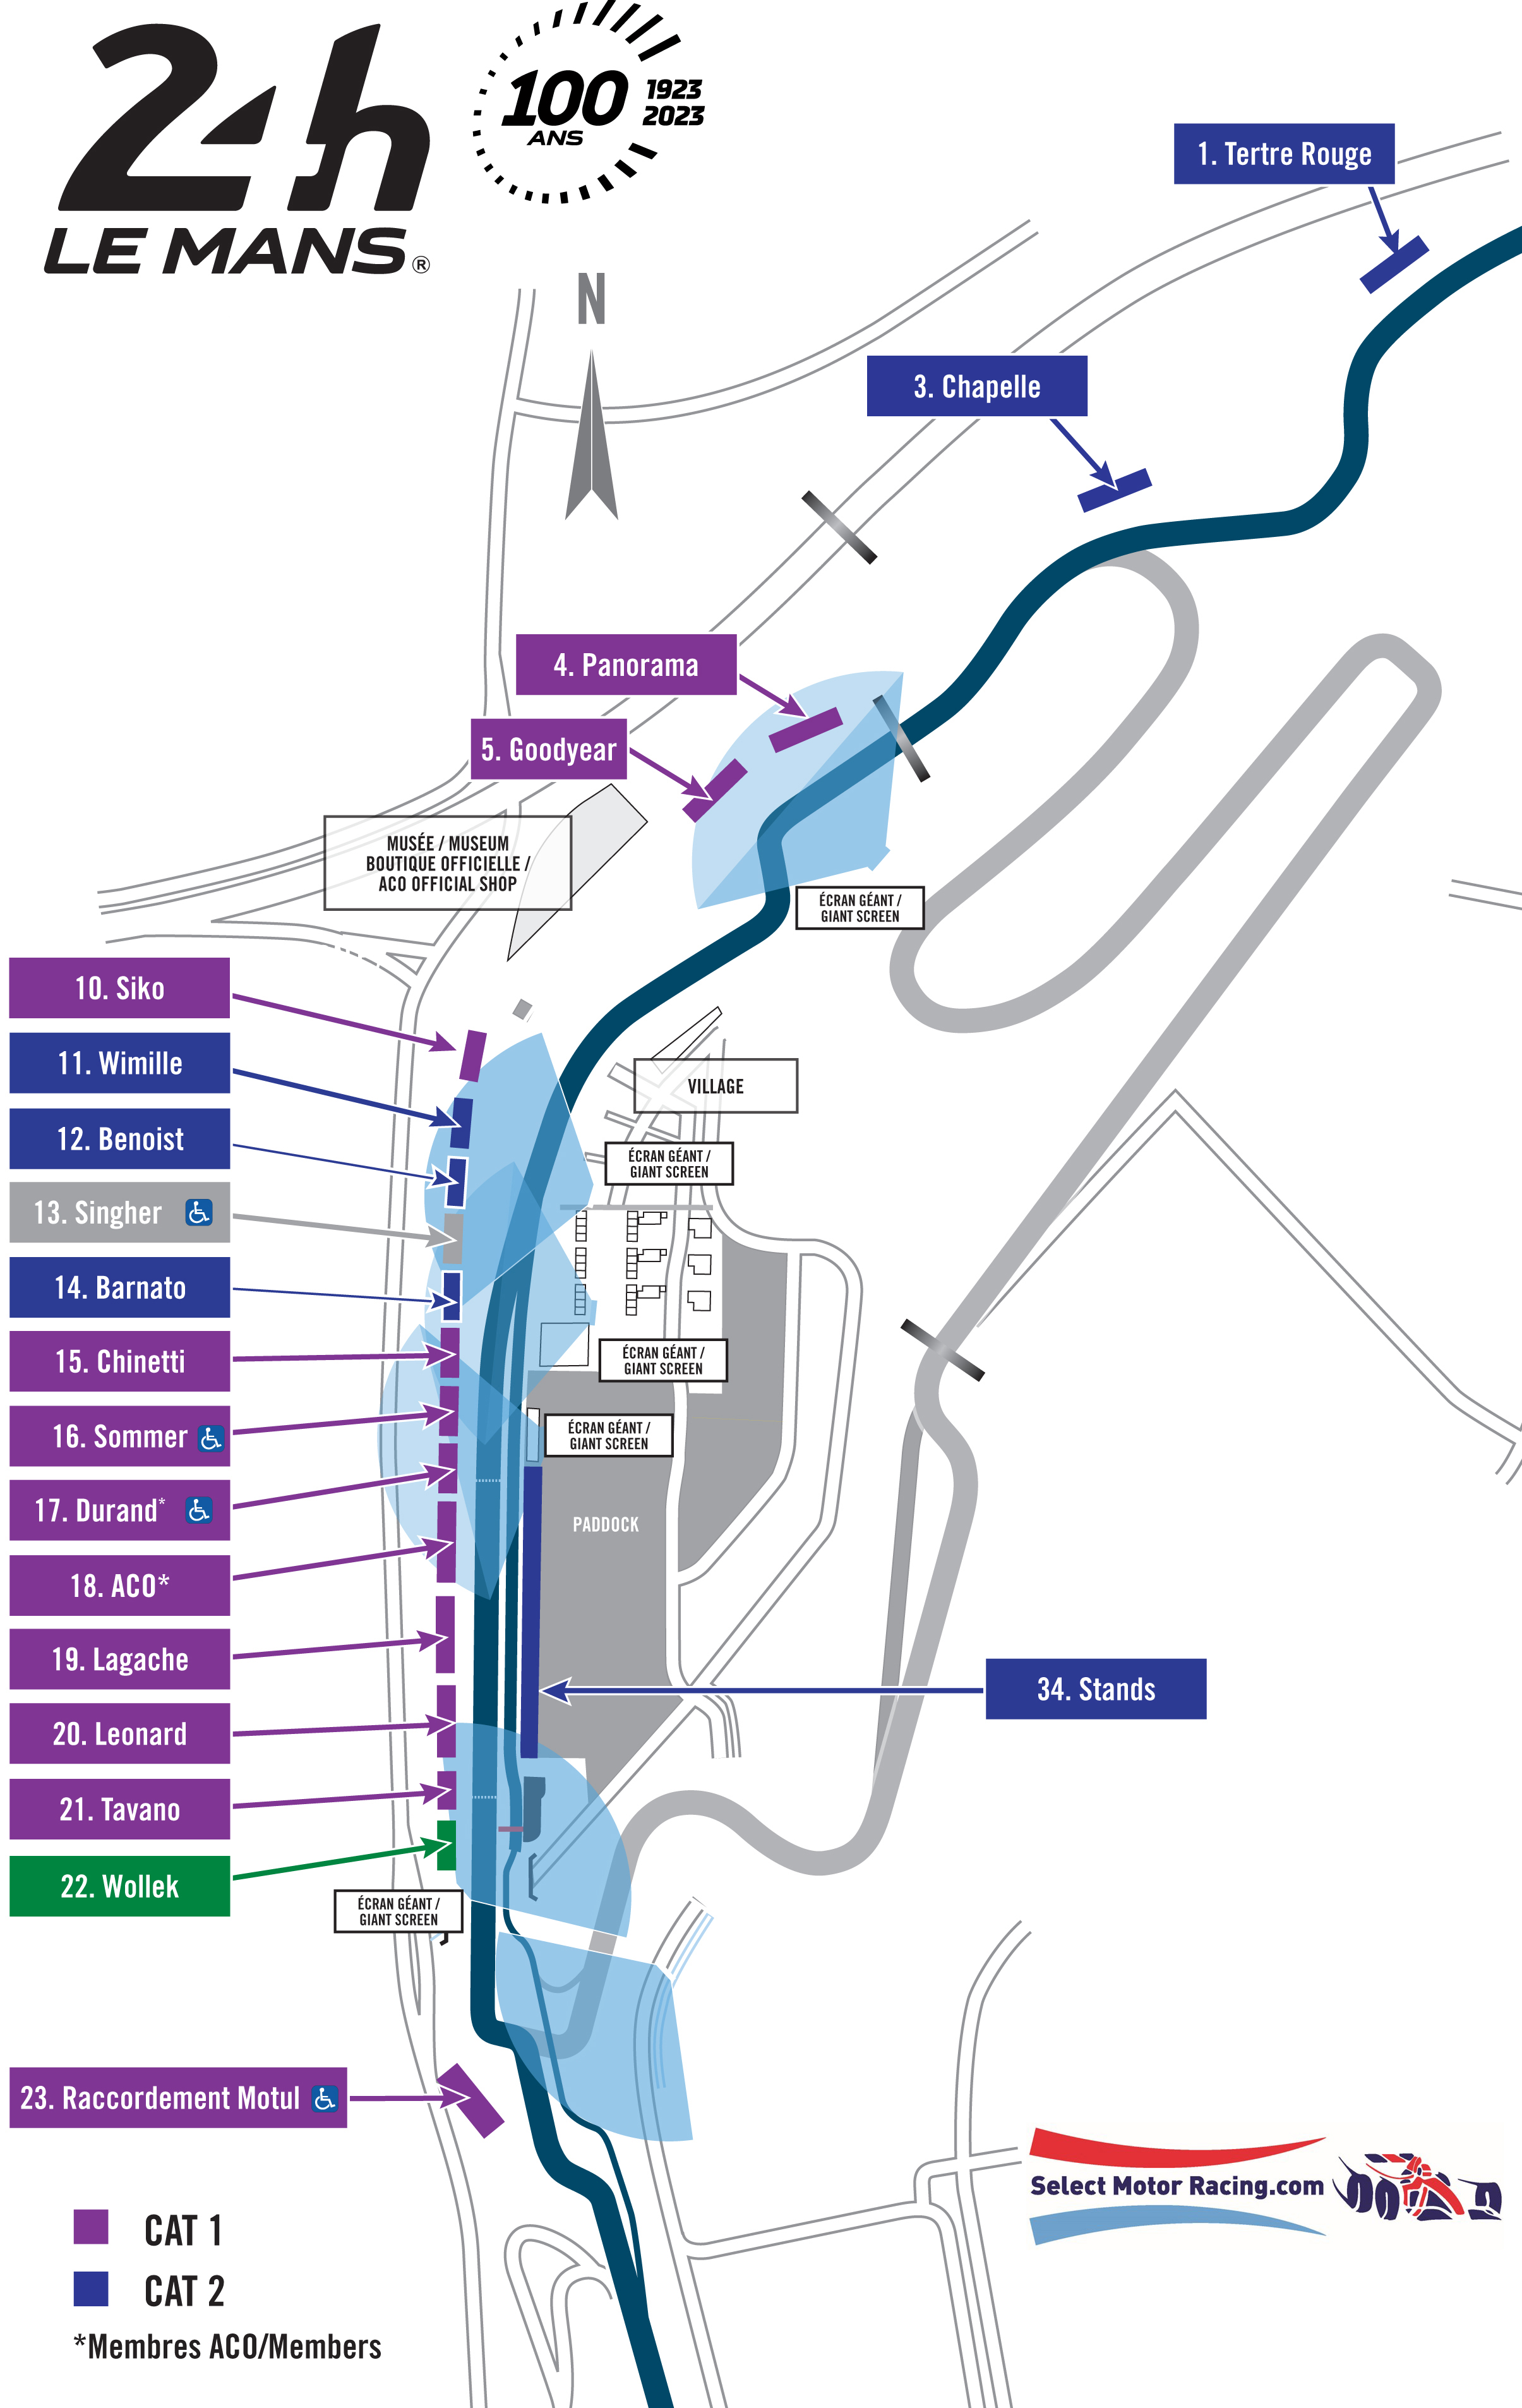 Le Mans 24hr ACO. Circuit Maps, Race Tickets, Camping, Hospitality